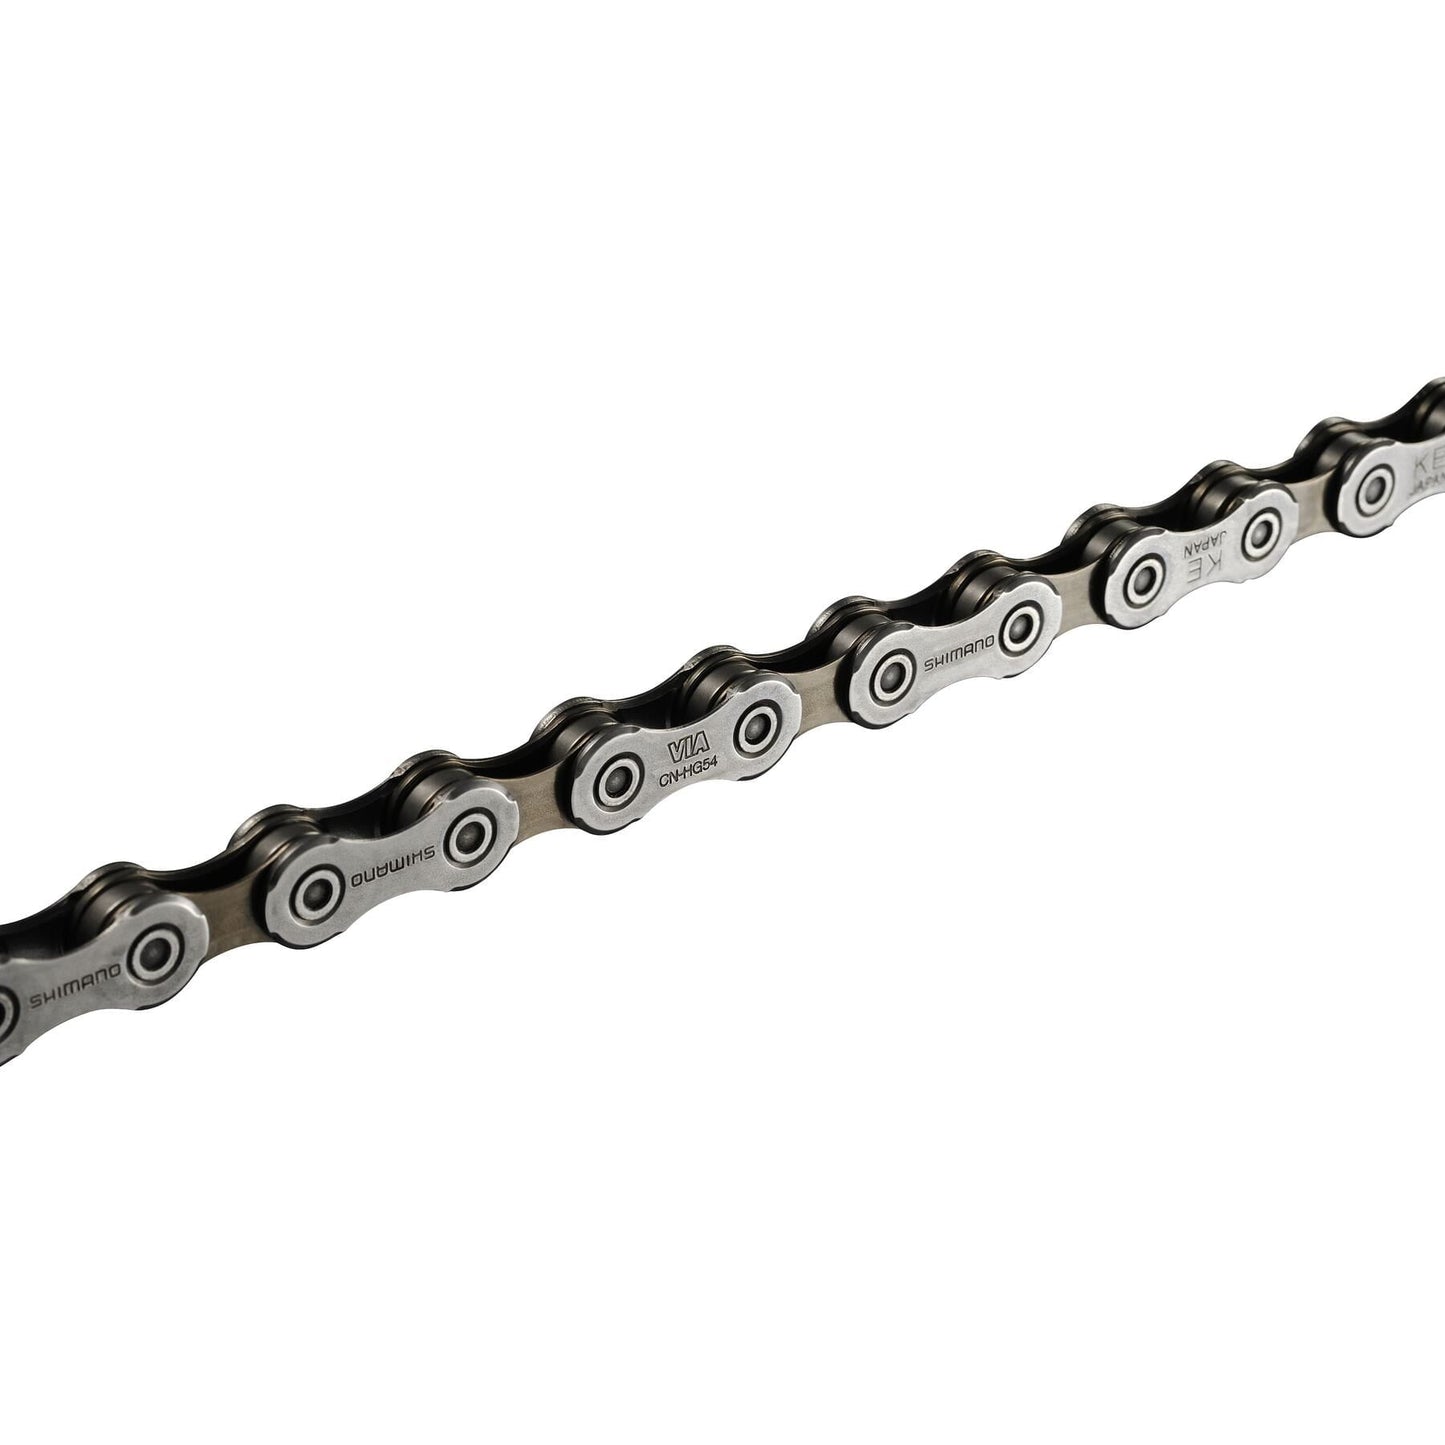 CN-HG54 HG-X Directional Chain 10 Speed 116 Links